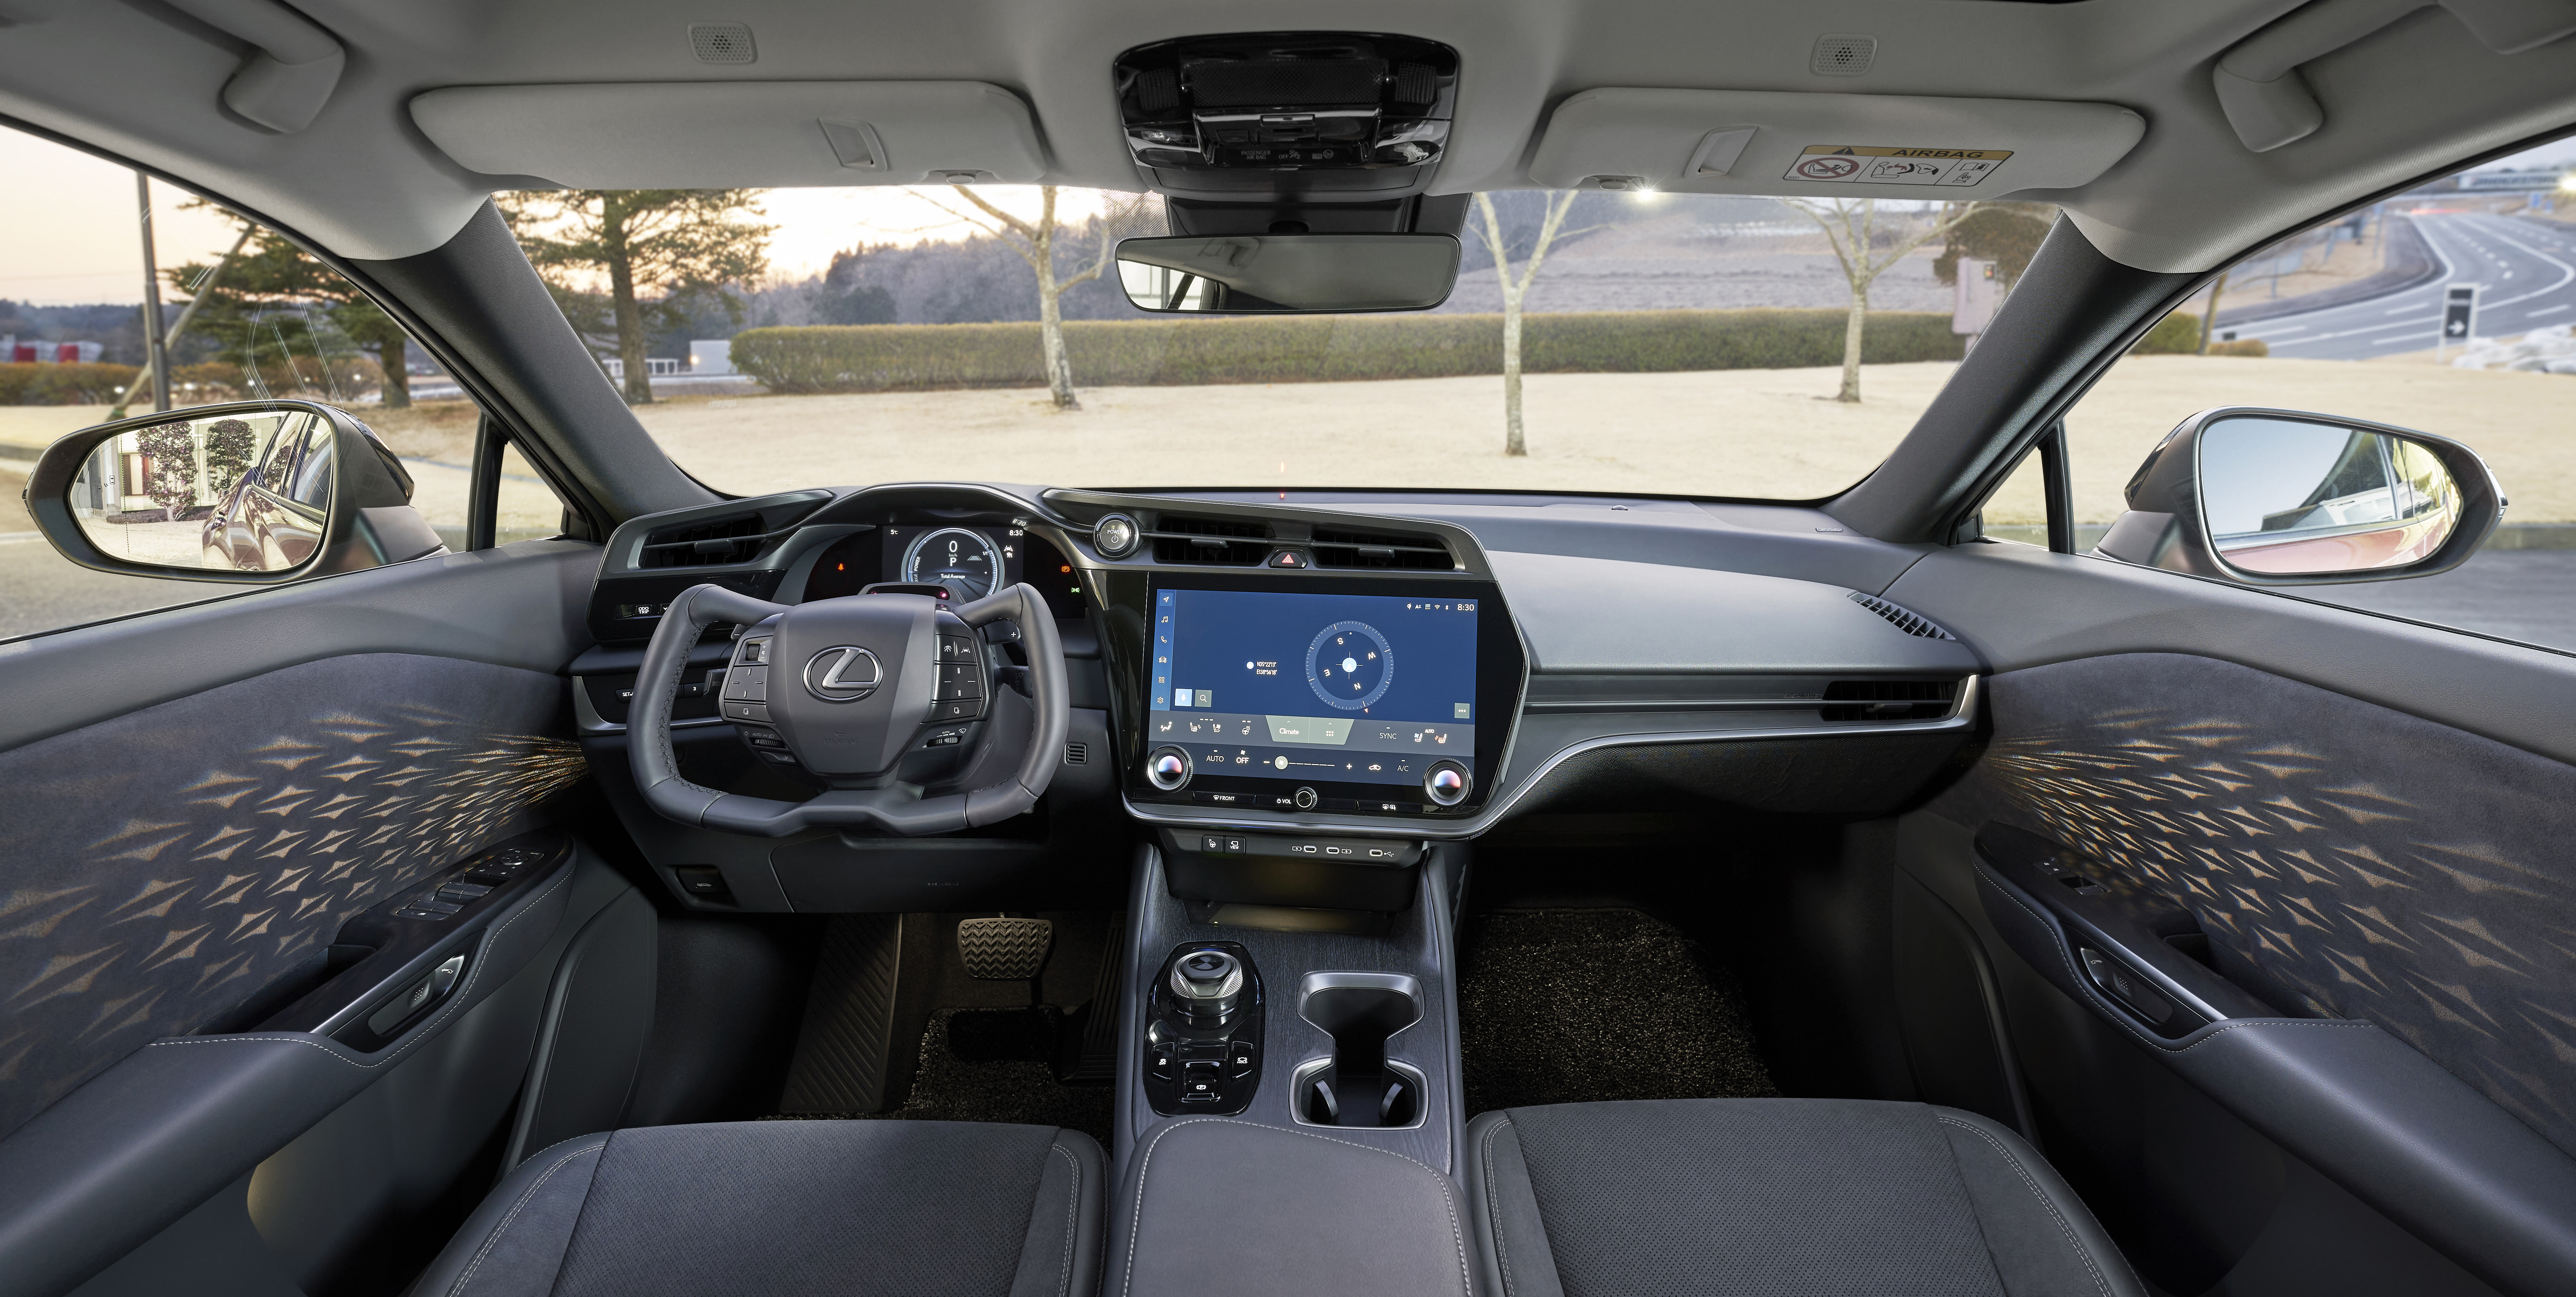 The yoke-style steering wheel and 14-inch touch screen of RZ with ambient lighting design.